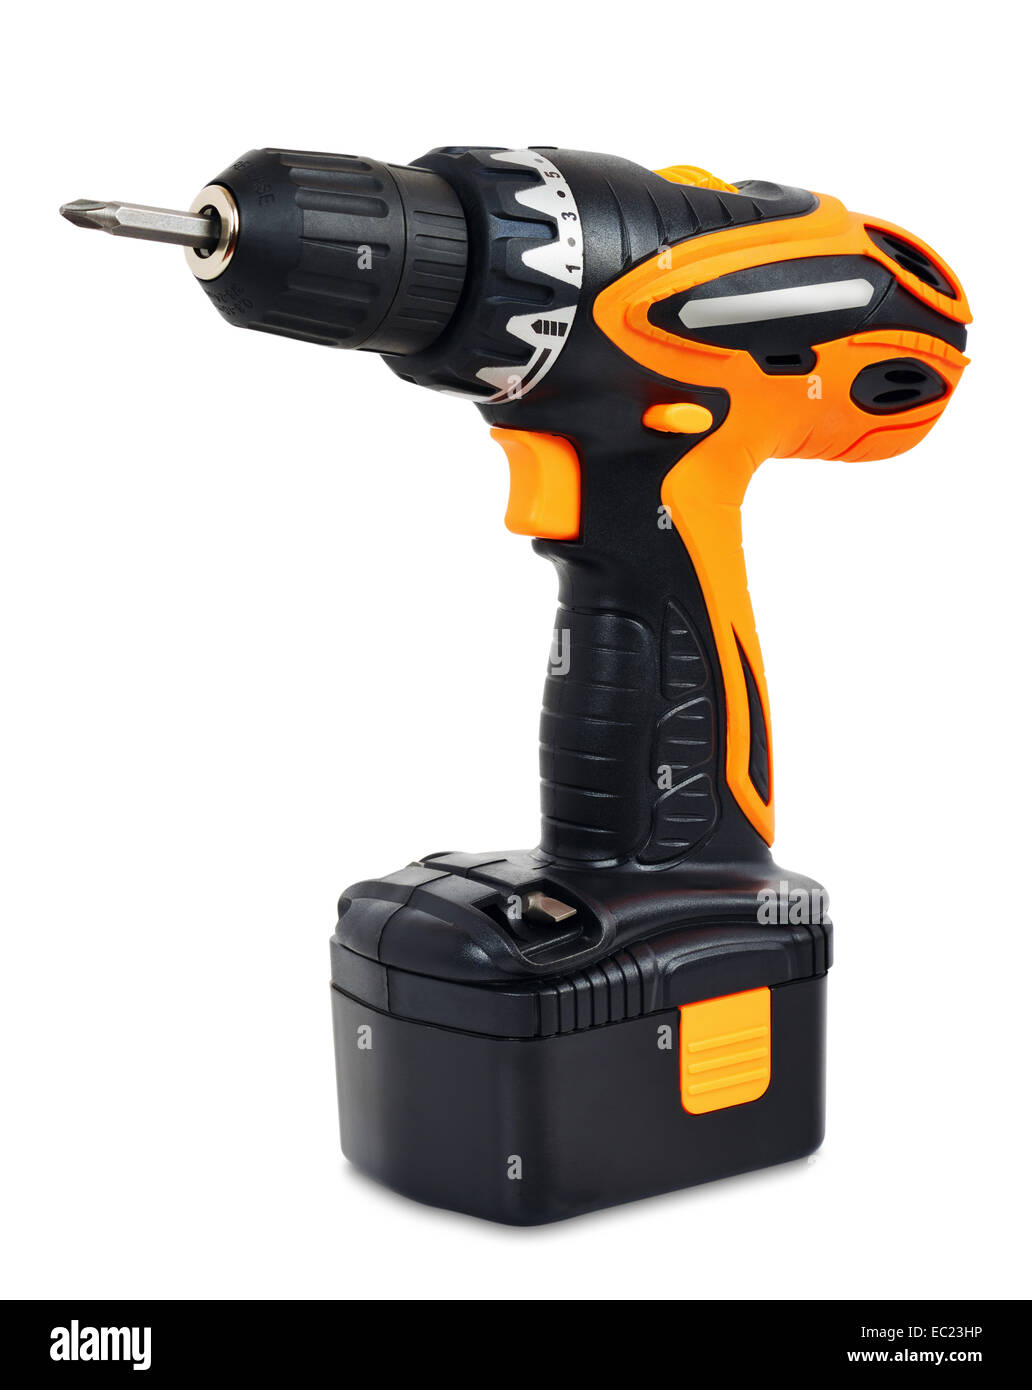 Cordless Drill - Srewdriver on a white background Stock Photo - Alamy